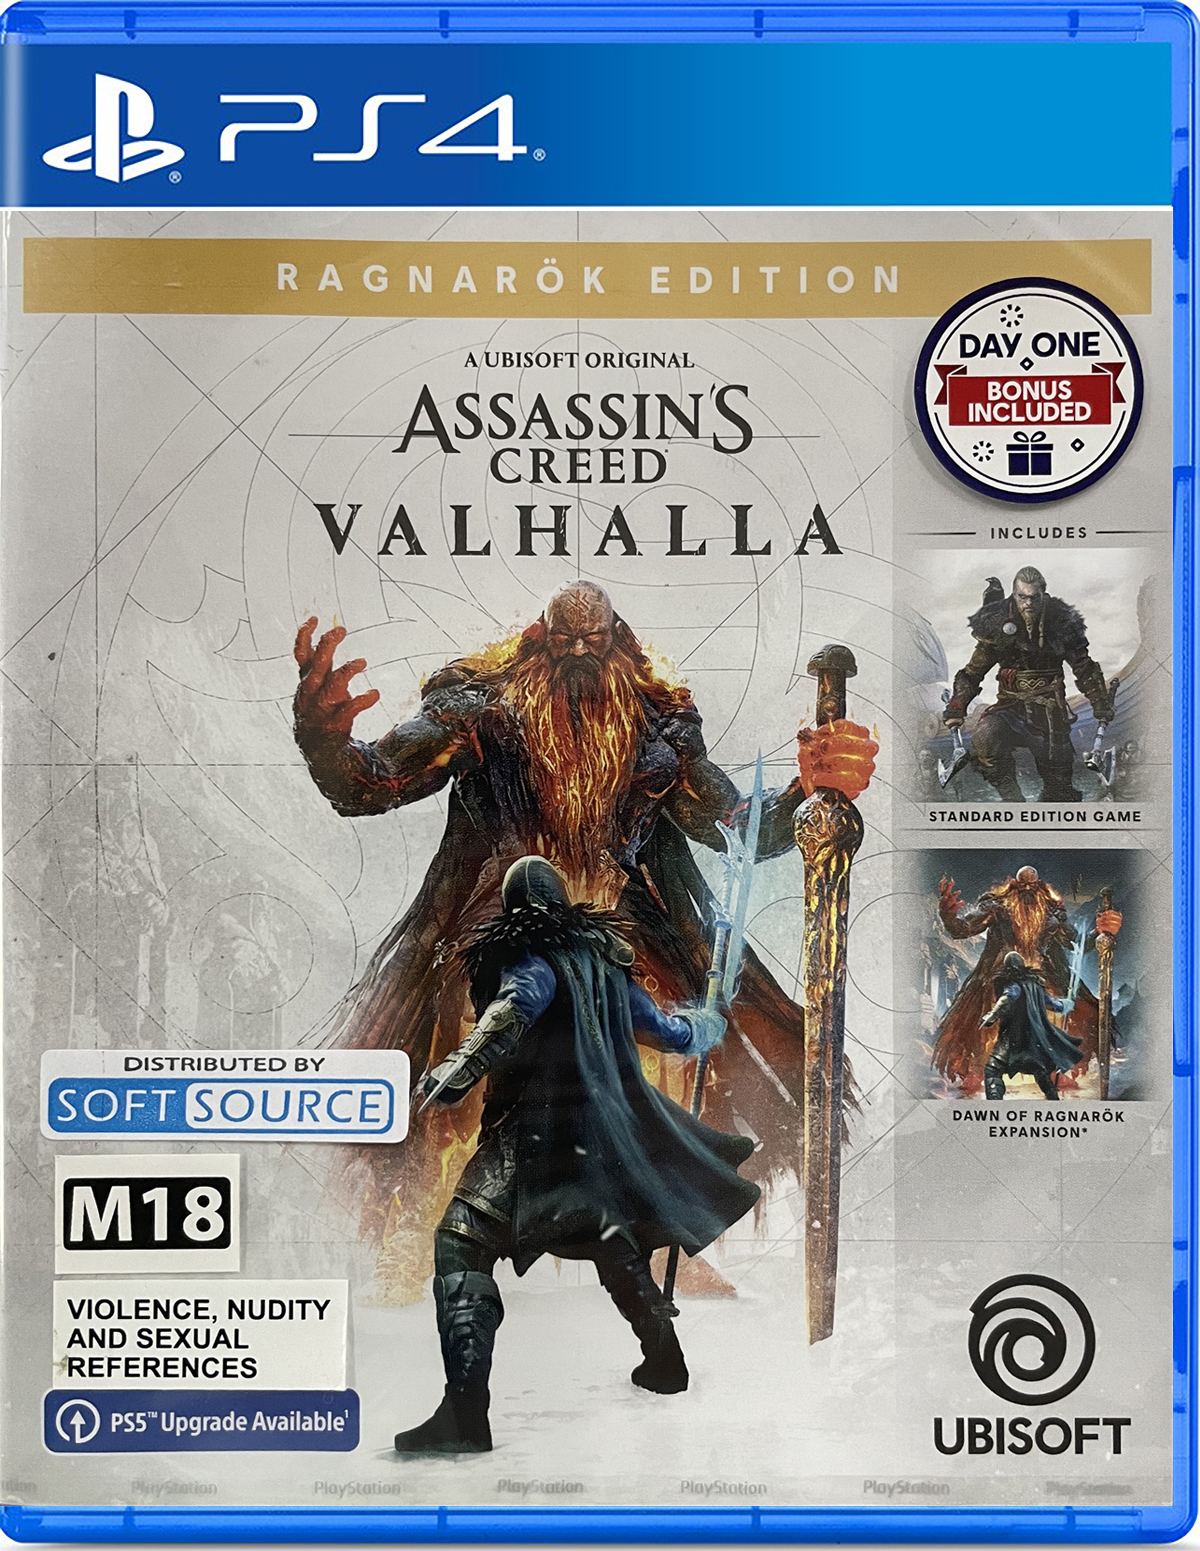 Assassin's Creed Valhalla [Ultimate Edition] (Multi-Language) for